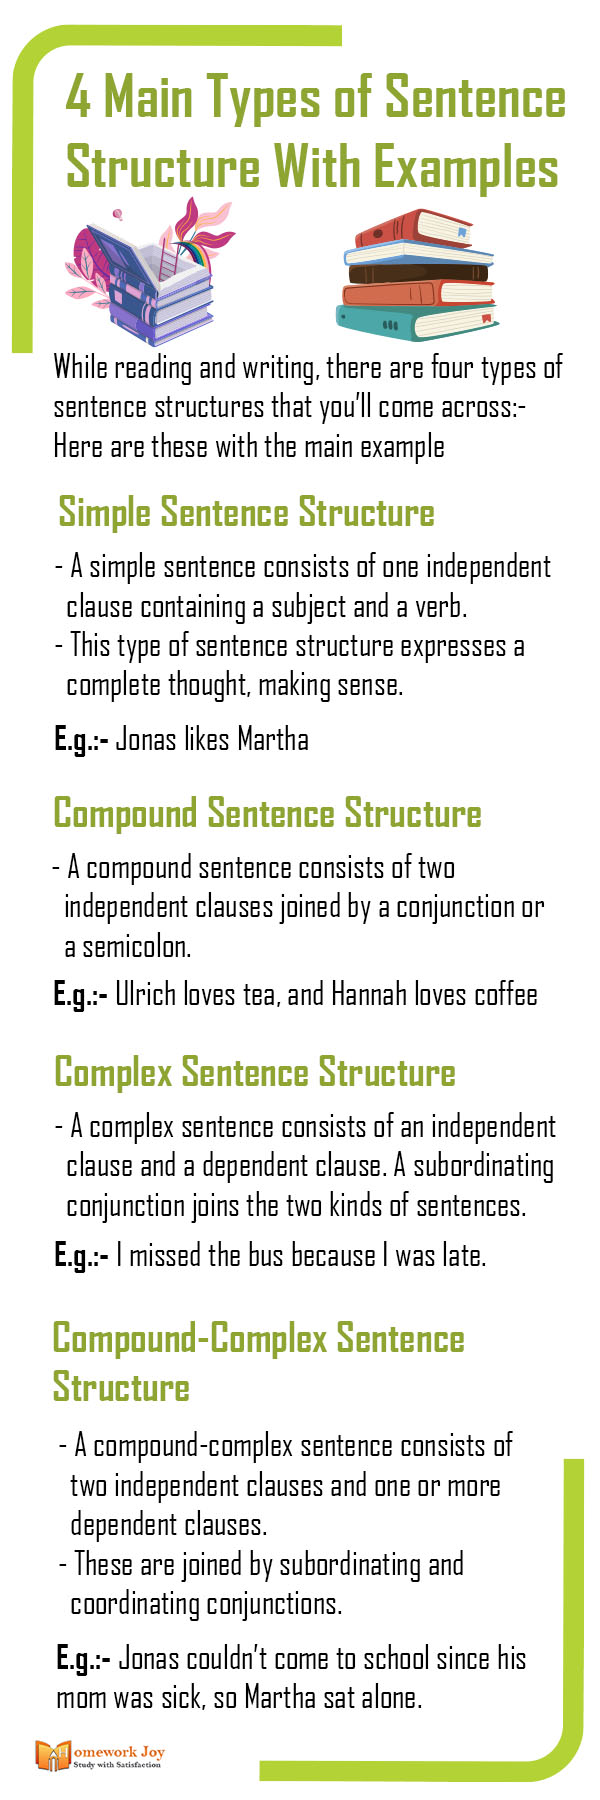 4 Sentence Structure Types